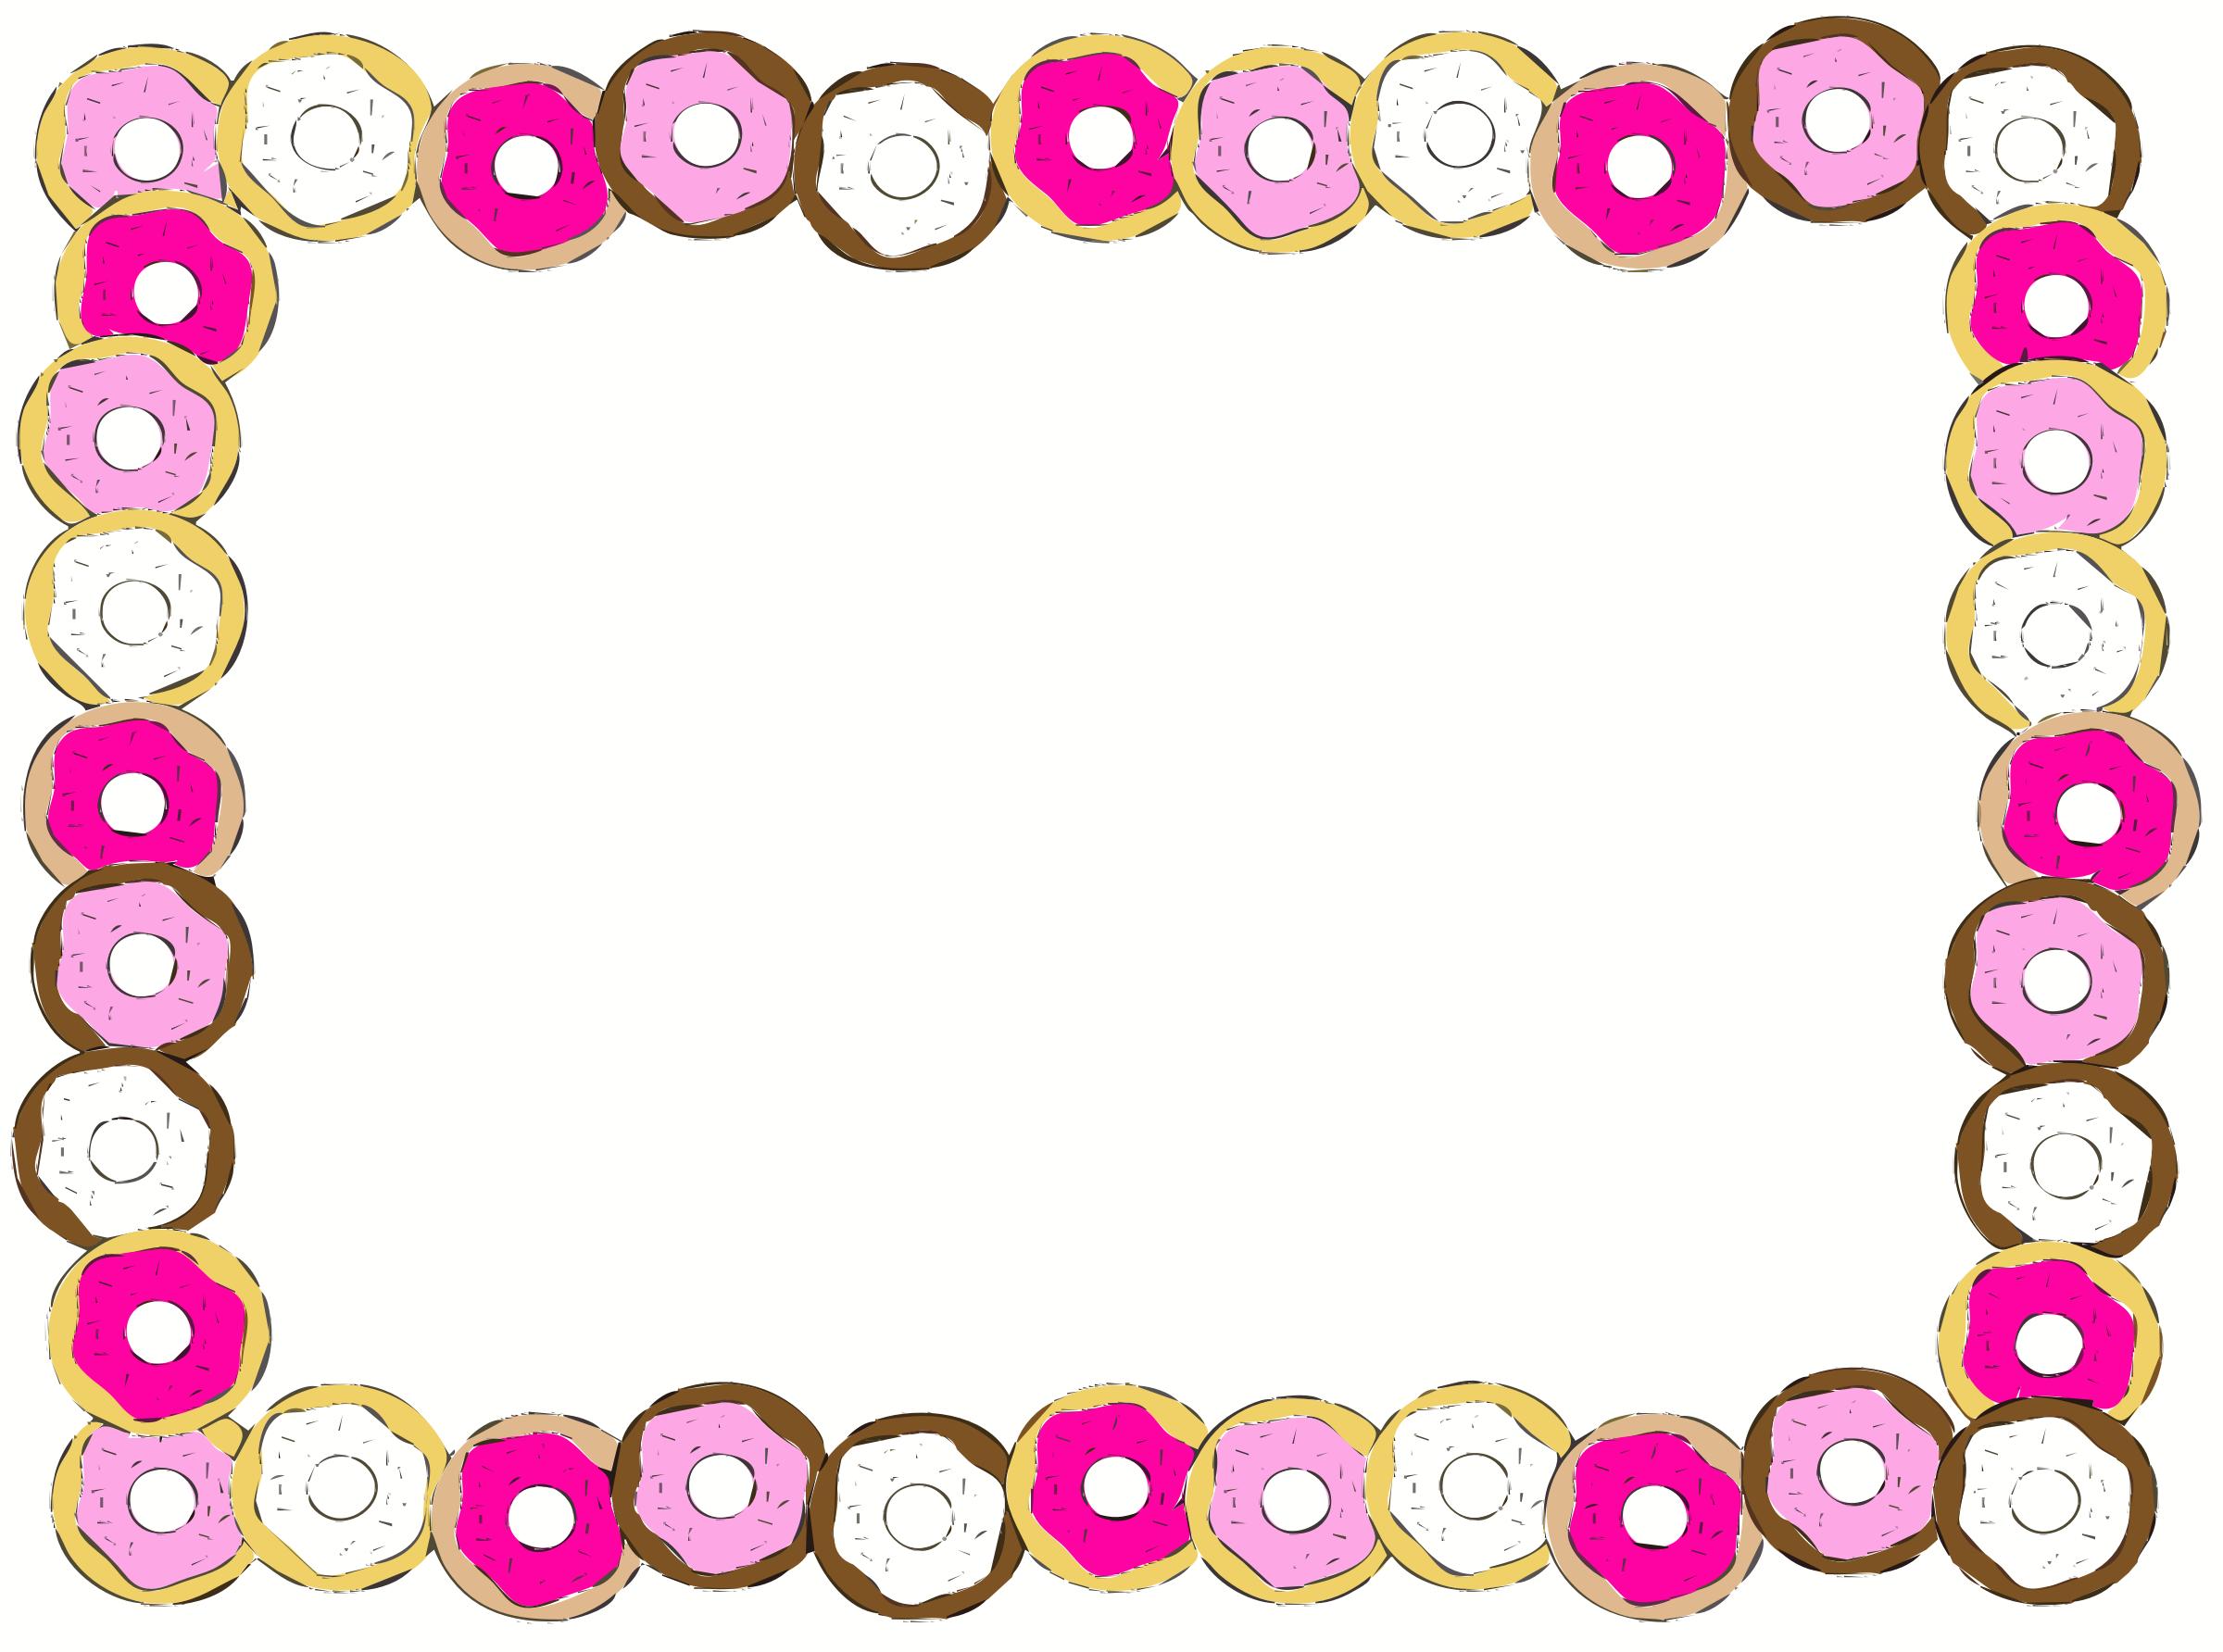 do you like doughnuts png icons